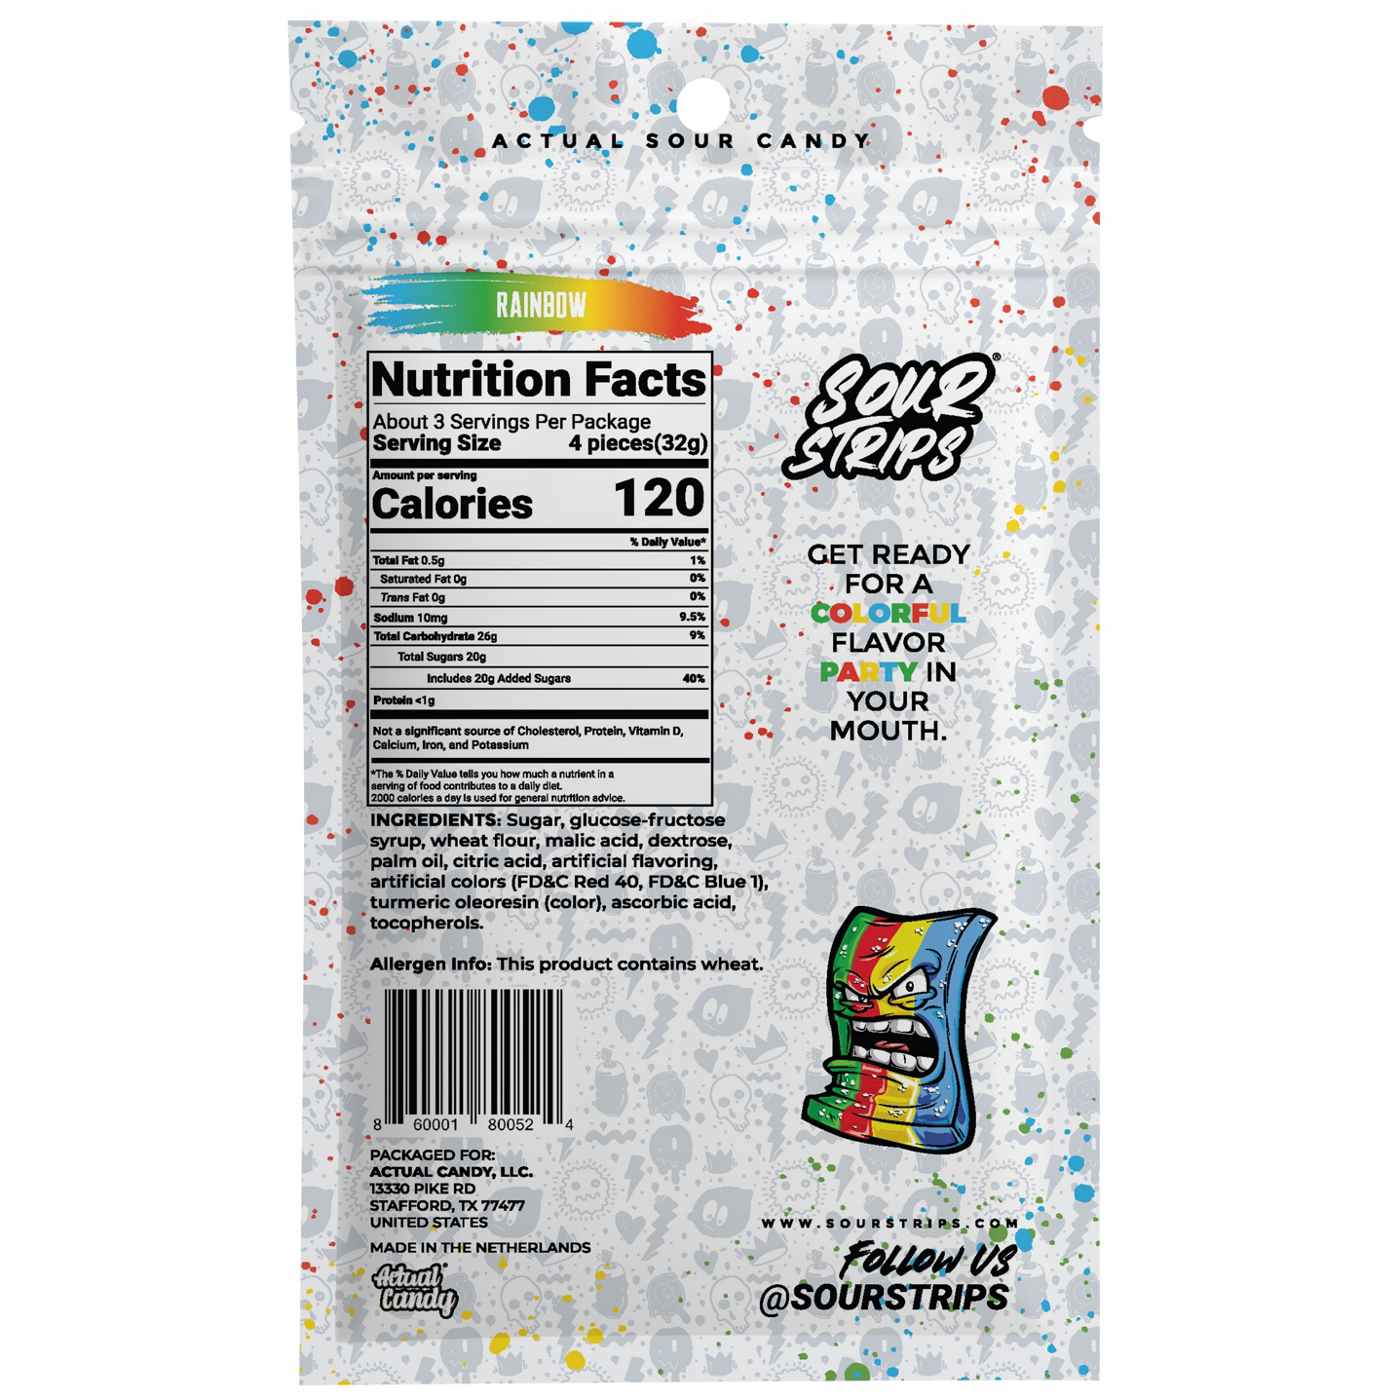 Sour Strips Rainbow Flavor Candy; image 2 of 2